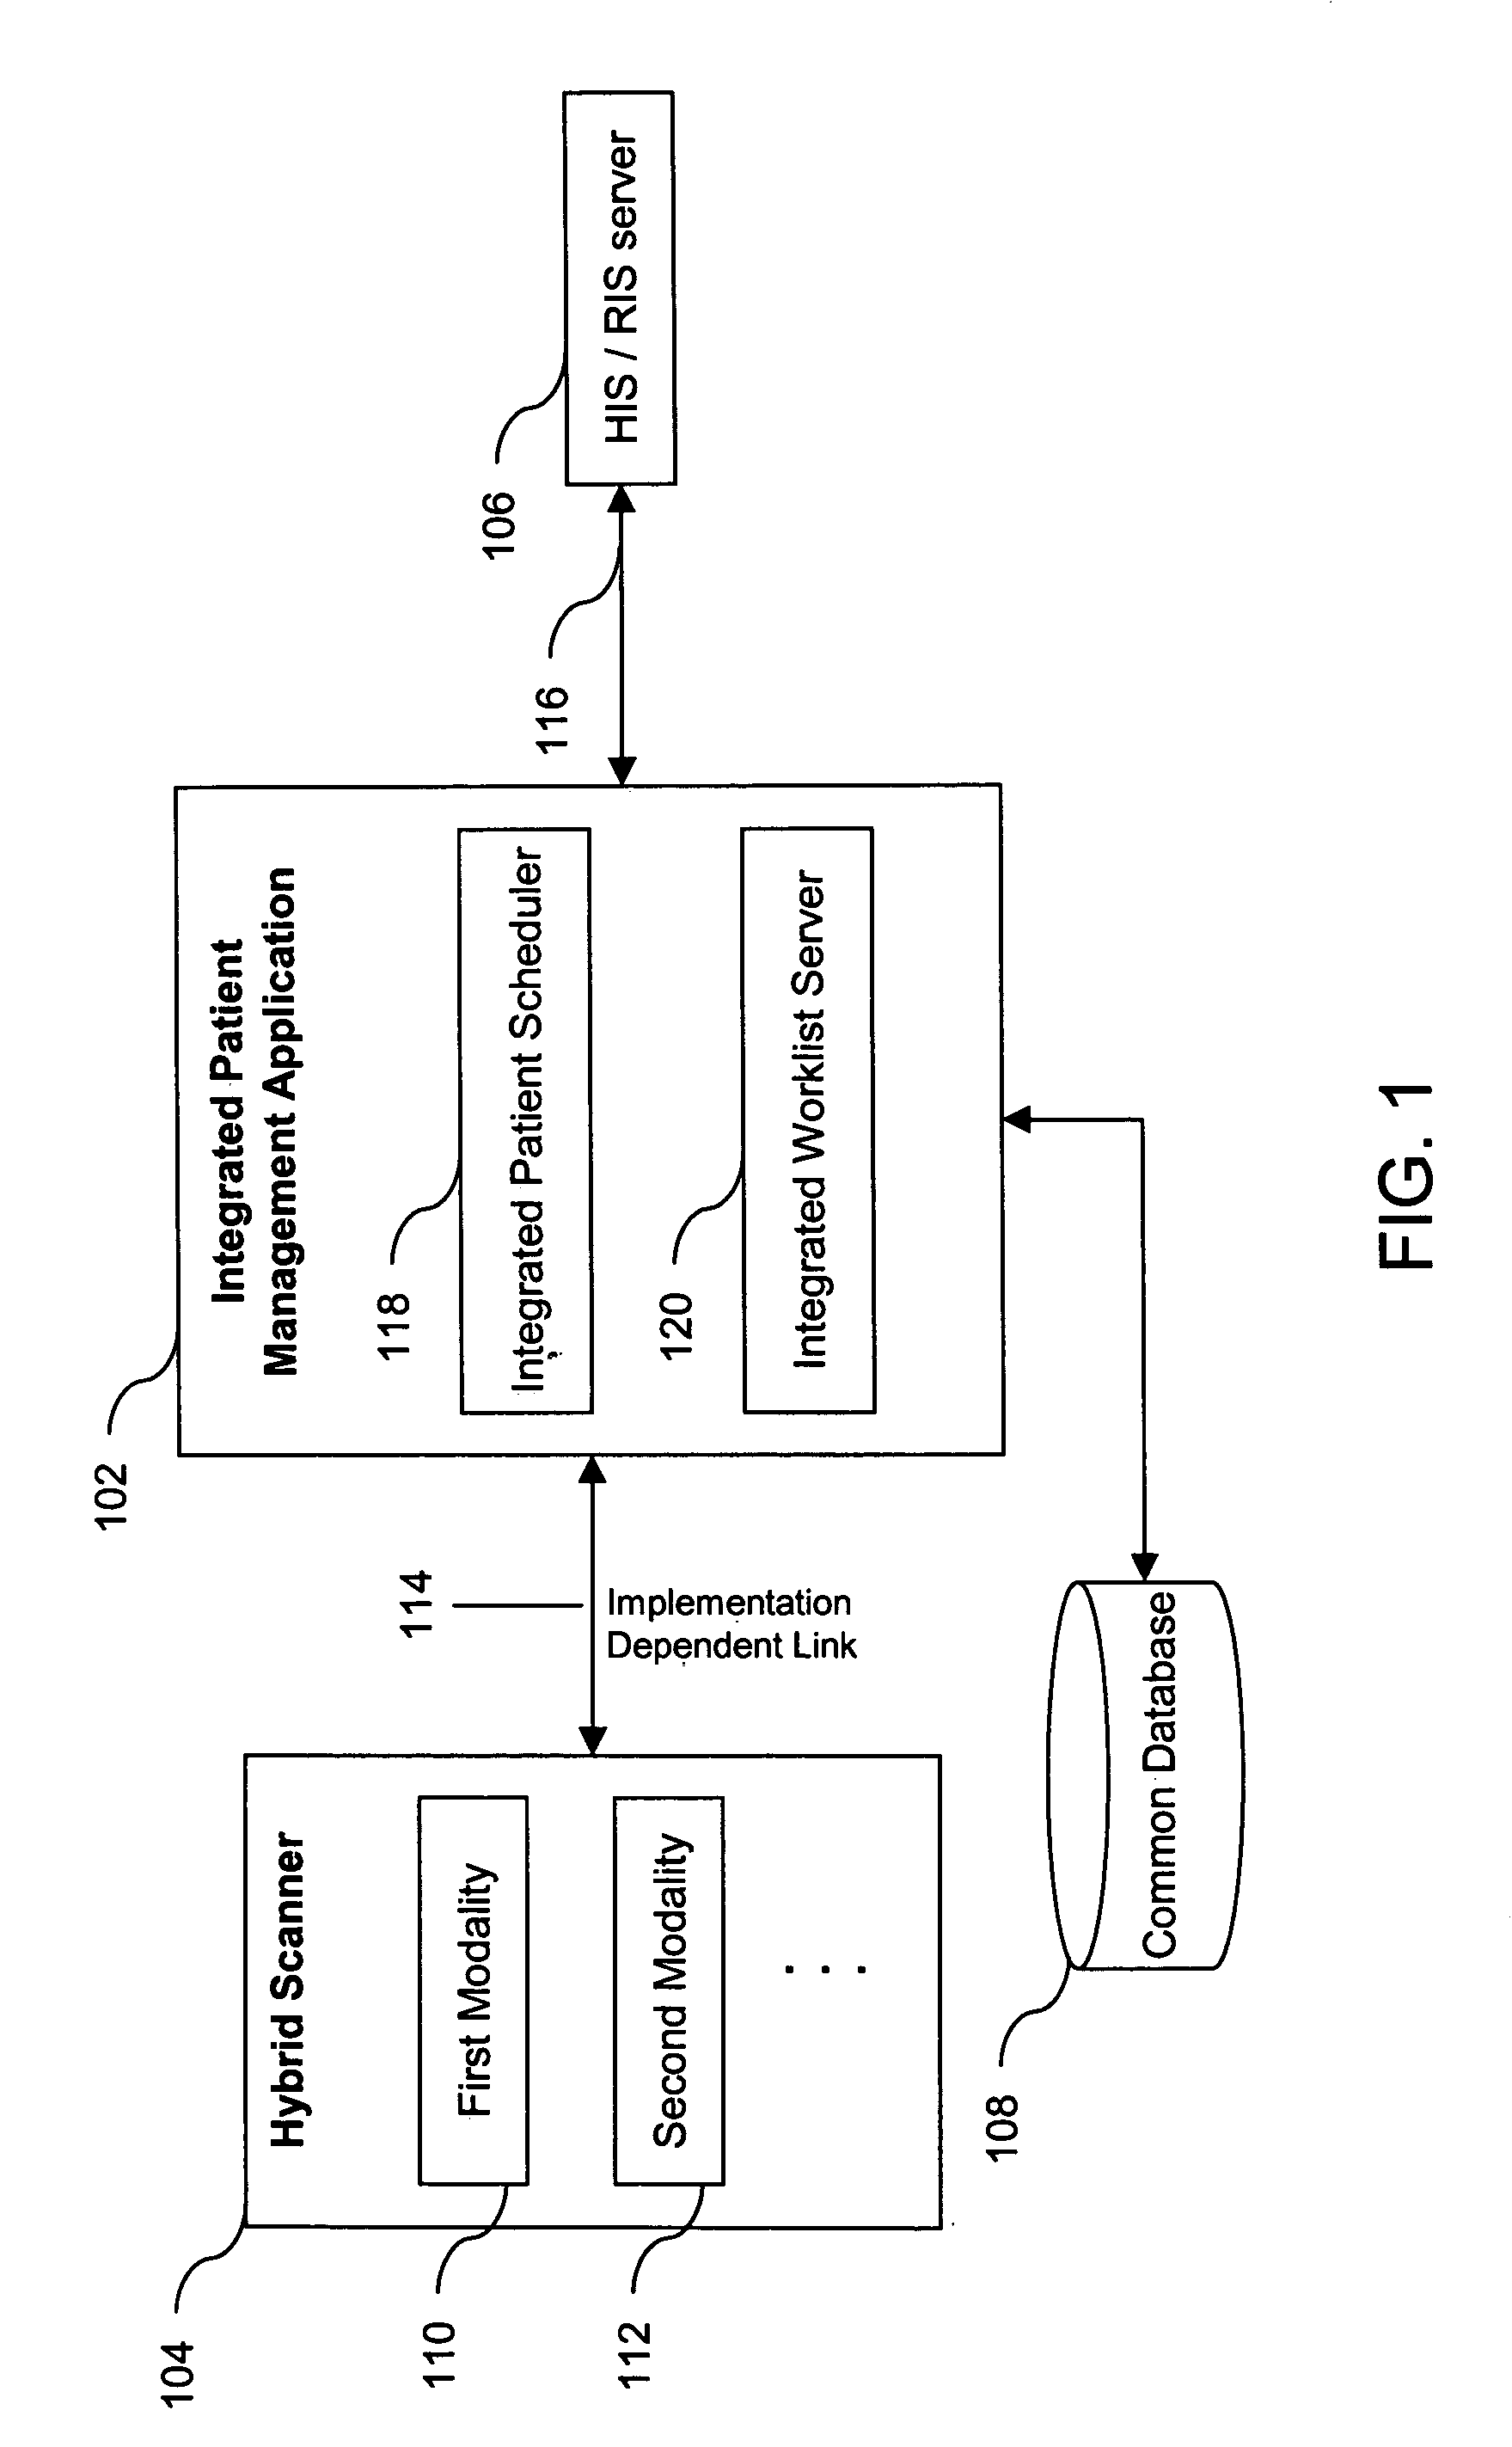 Method and system for managing modality worklists in hybrid scanners